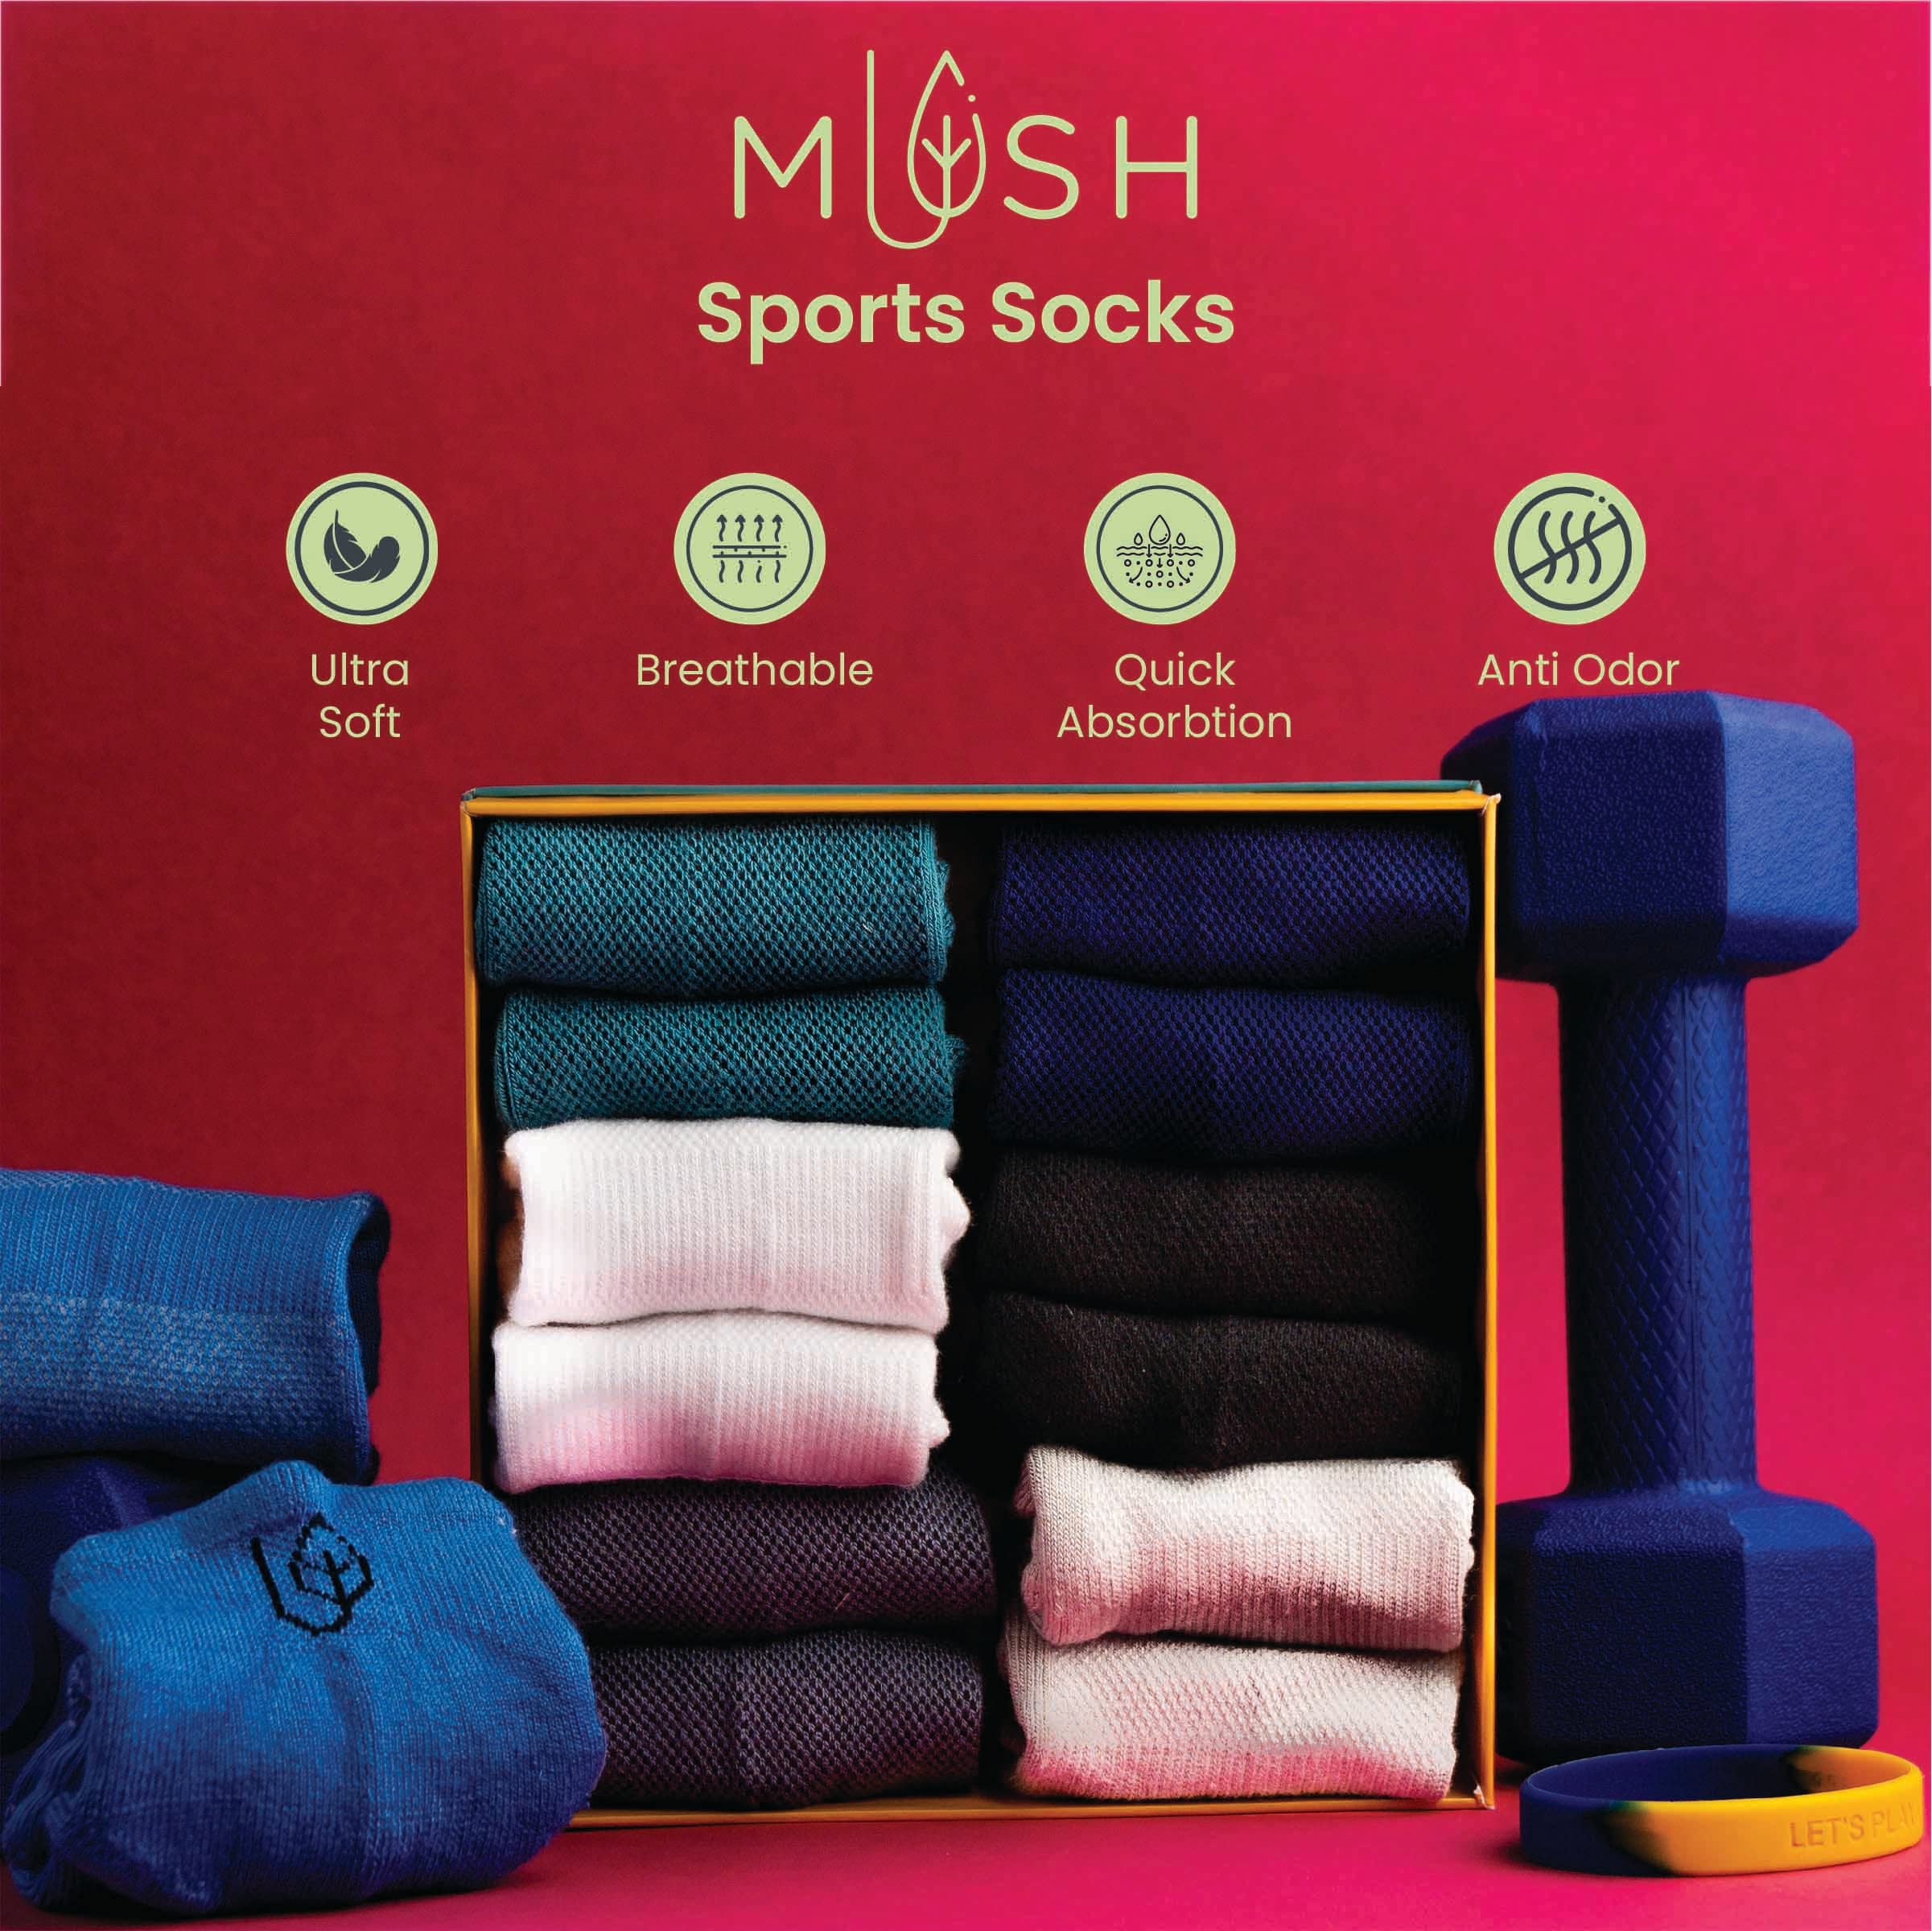 Mush Bamboo Ankle Socks for Women || Ultra Soft, Anti Odor and Anti Blister Design || For Casual Wear, Sports, Running, & Gym use || Free Size Pack of 3